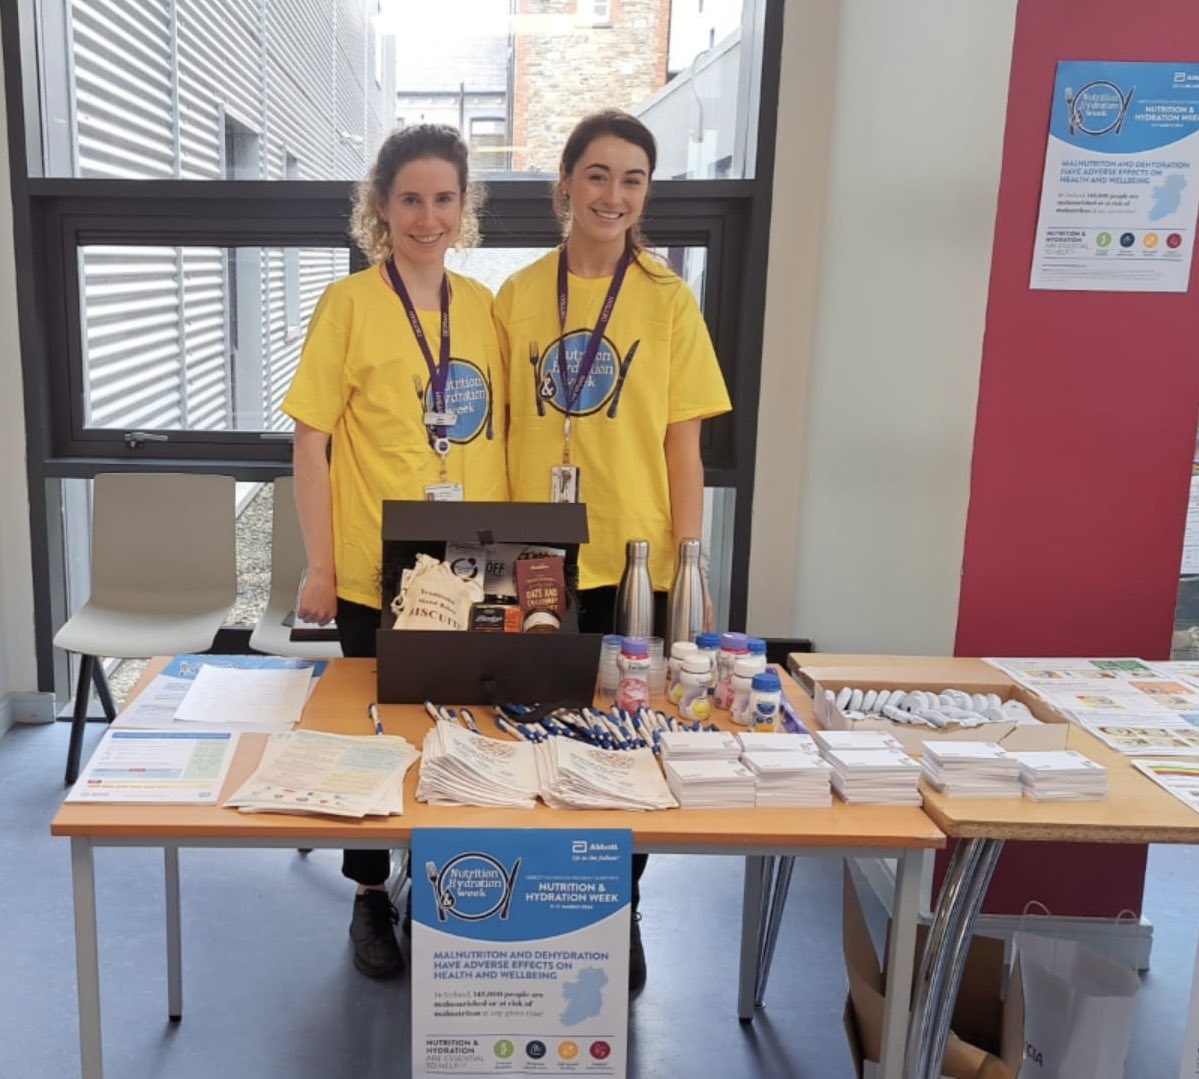 Tipperary University Hospital Dietetic Department celebrate Nutrition and Hydration week ,informing all staff of the improvements made on Nutrition and Hydration within the hospital ,great advise well done and thanks to all in the department @IEHospitalGroup @NHWeek @WeHSCPs